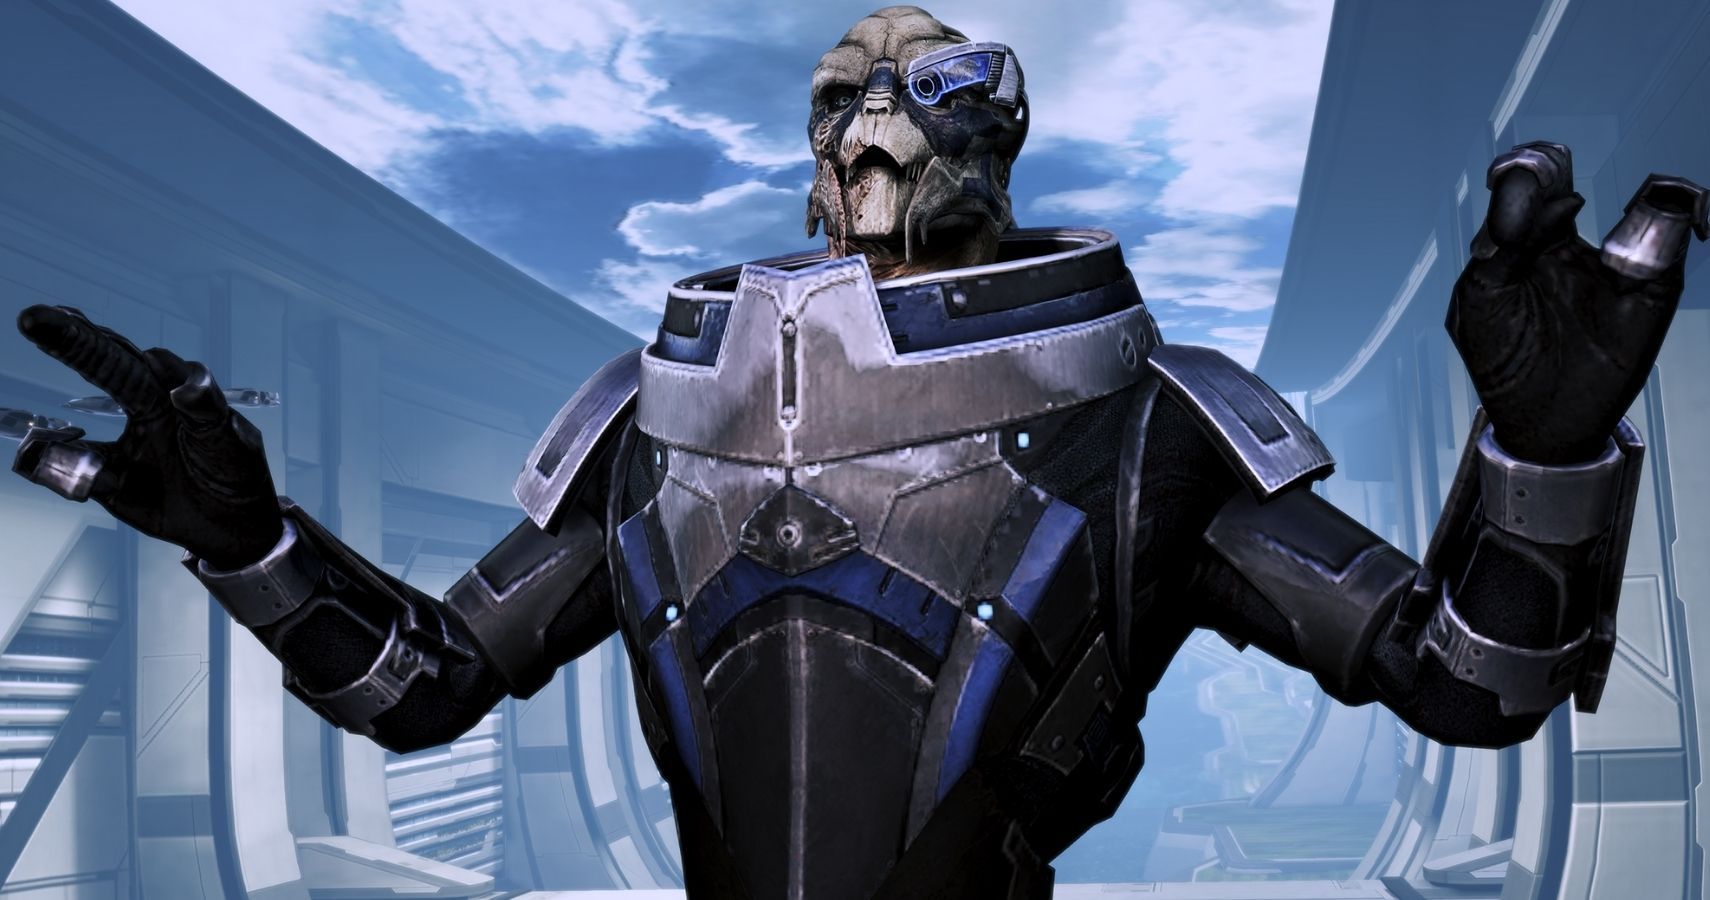 Garrus, a tall alien from the Mass Effect series, stands in a city setting. His arms are in the air with joy.